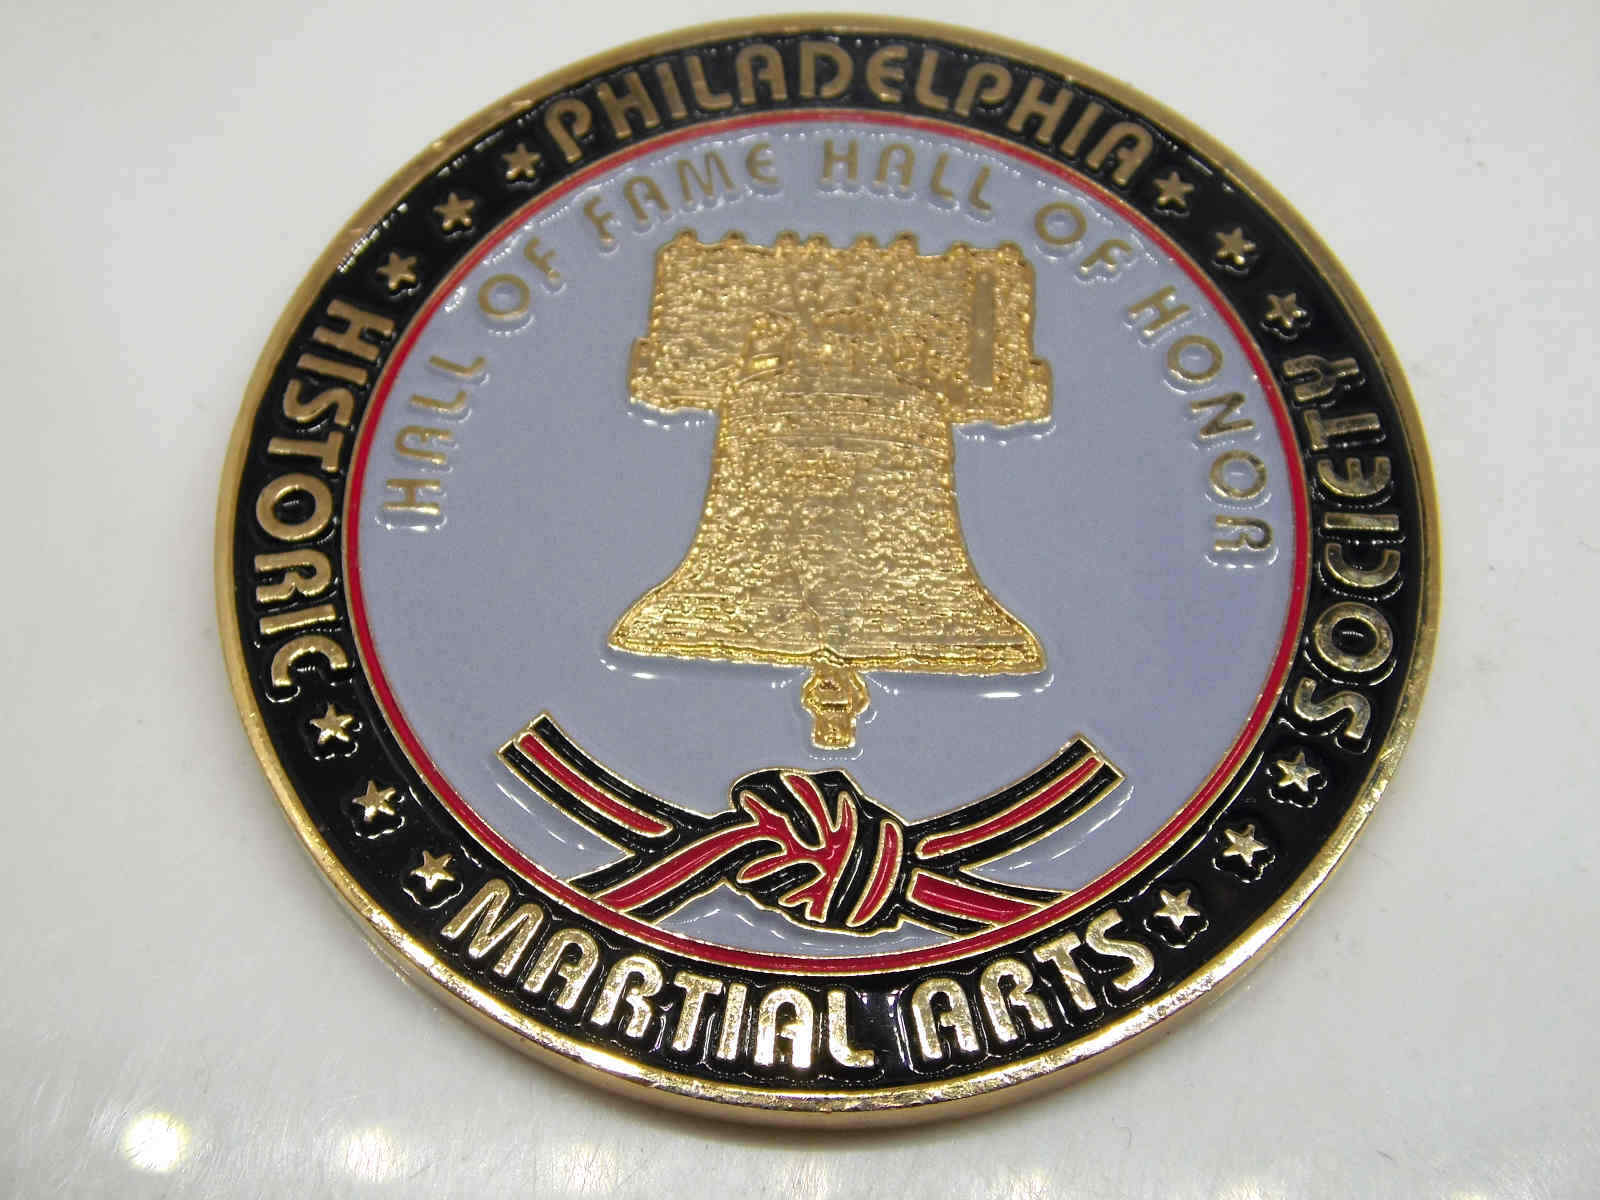 HALL OF FAME HALL OF HONOR MARTIAL ARTS CHALLENGE COIN